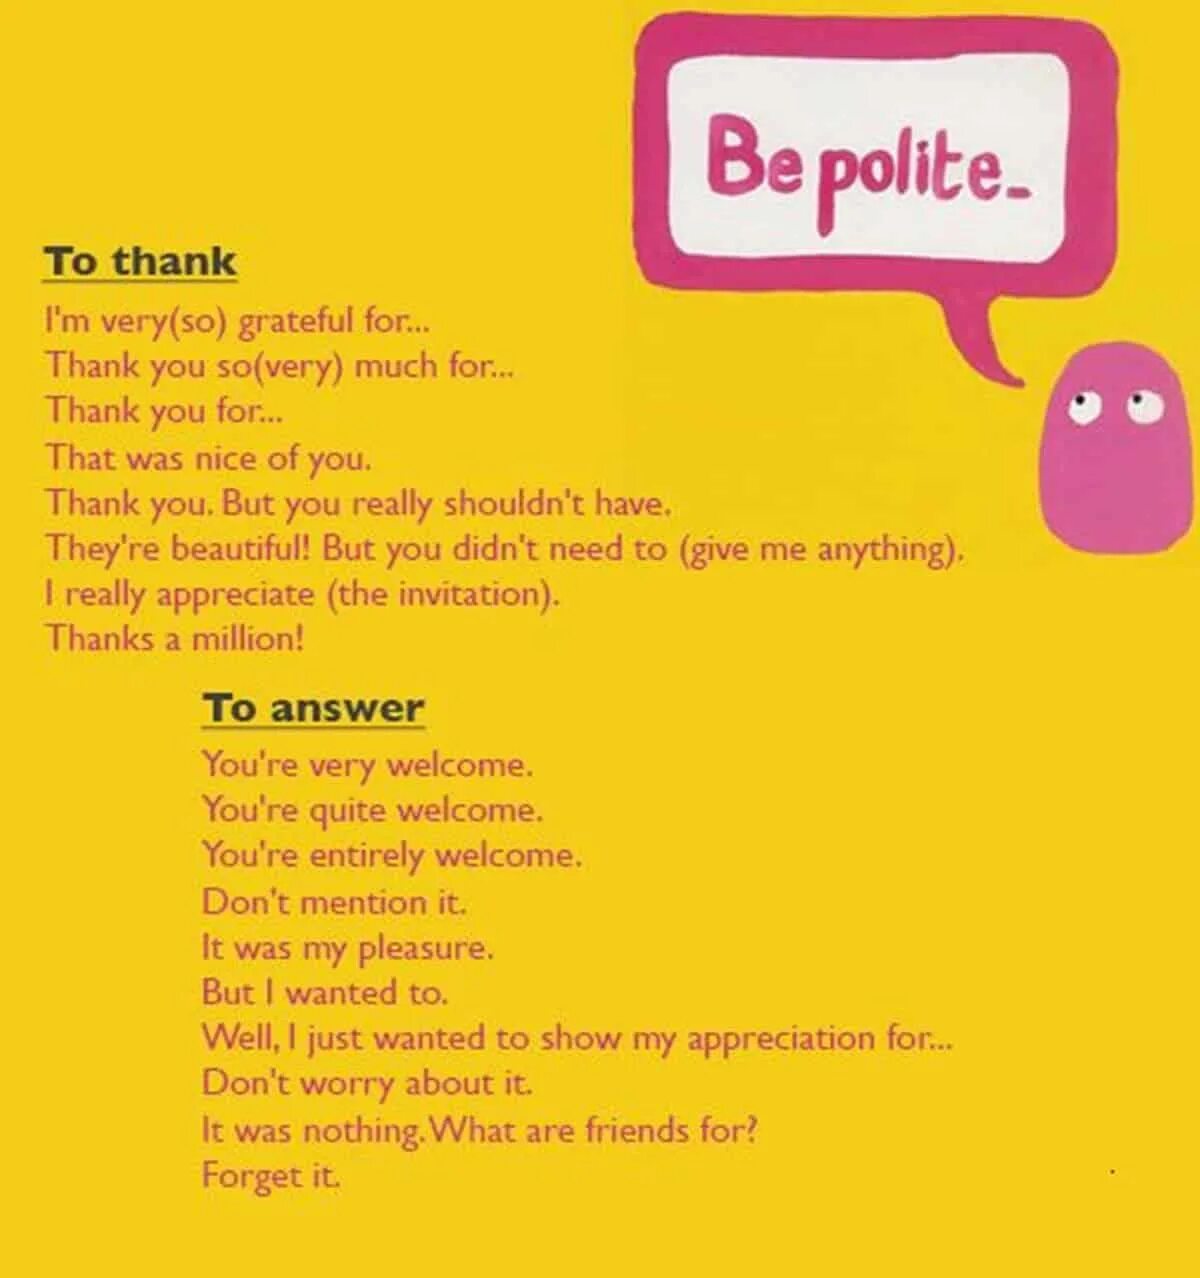 How are you reply. Polite phrases in English. How to be polite. How to be polite in English. Thank you in English.